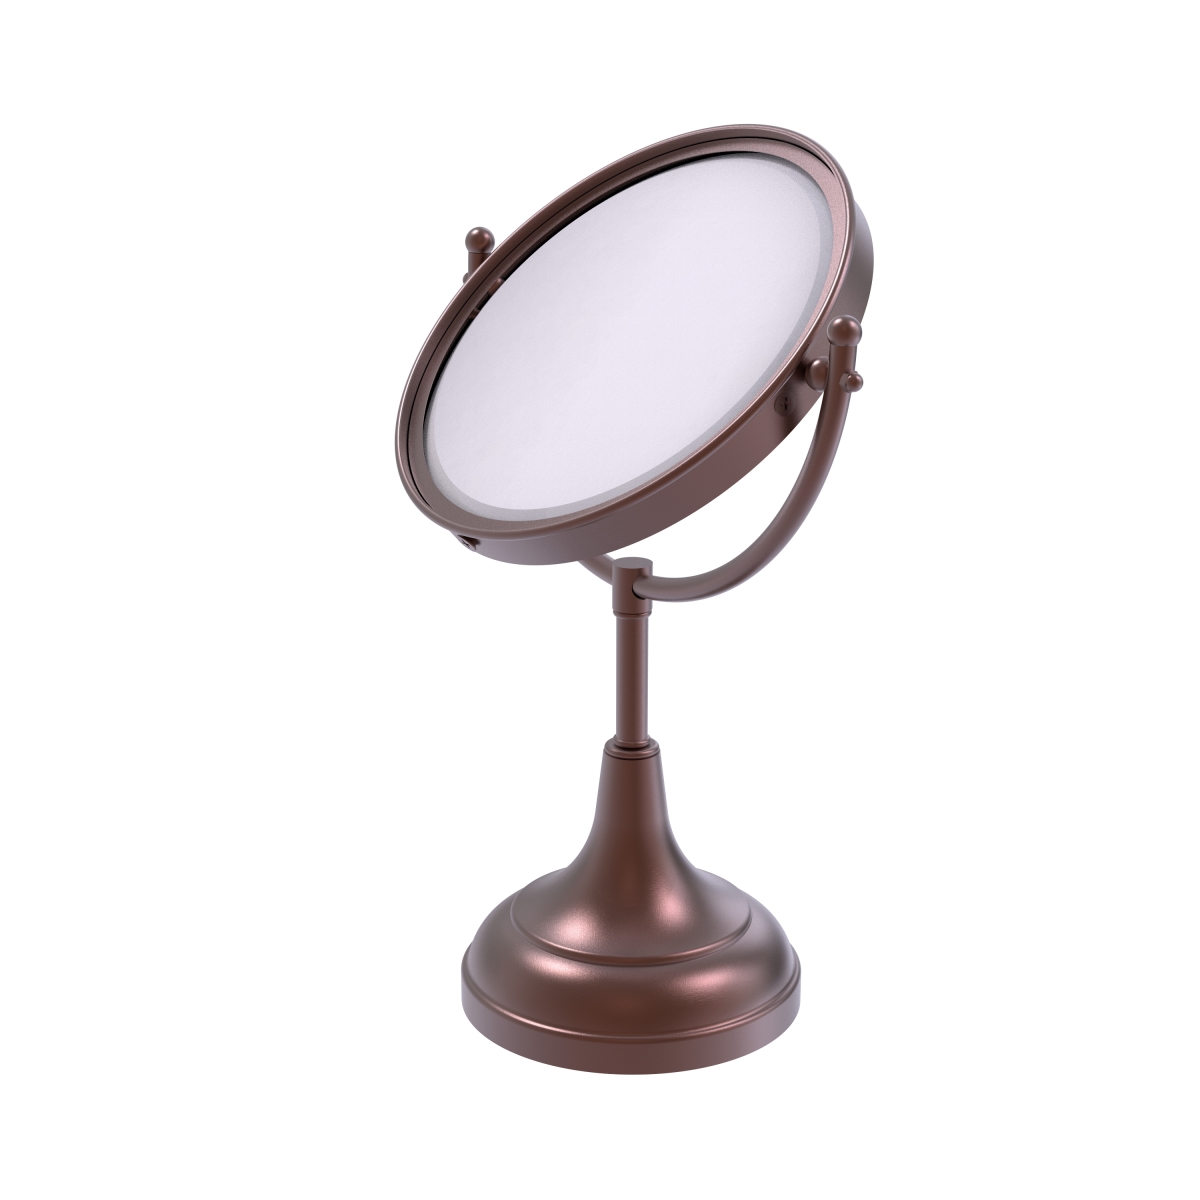 Picture of Allied Brass DM-2-2X-CA 8 in. Vanity Top Make-Up Mirror 2X Magnification, Antique Copper - 15 x 8 x 8 in.